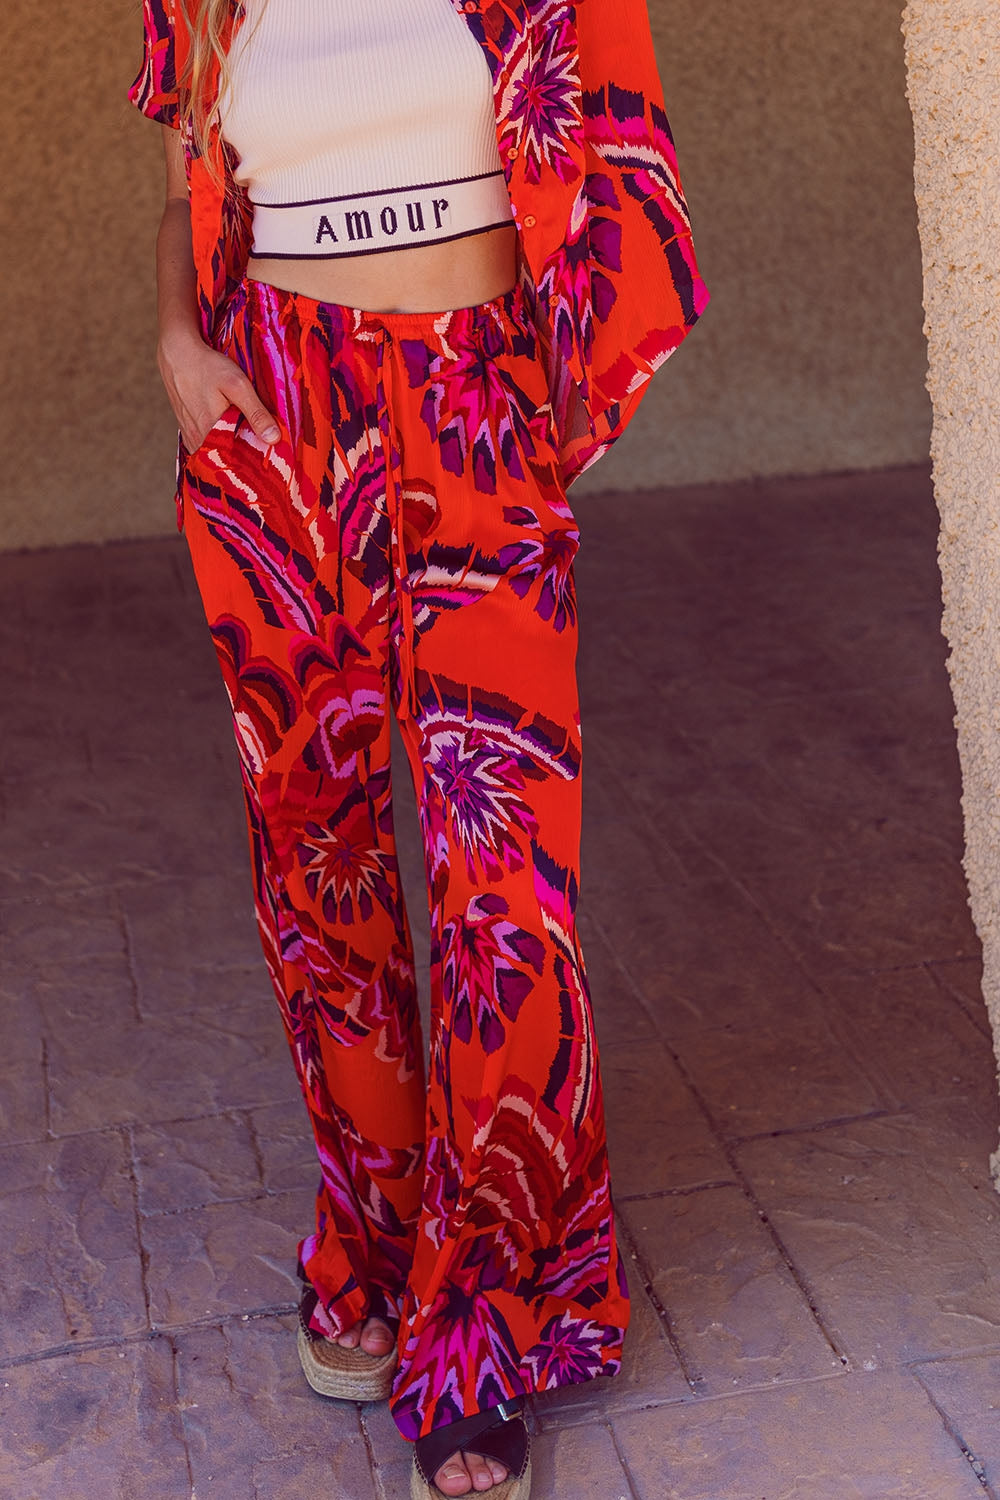 Palazzo Style Pants in Orange Abstract Floral Print - Szua Store